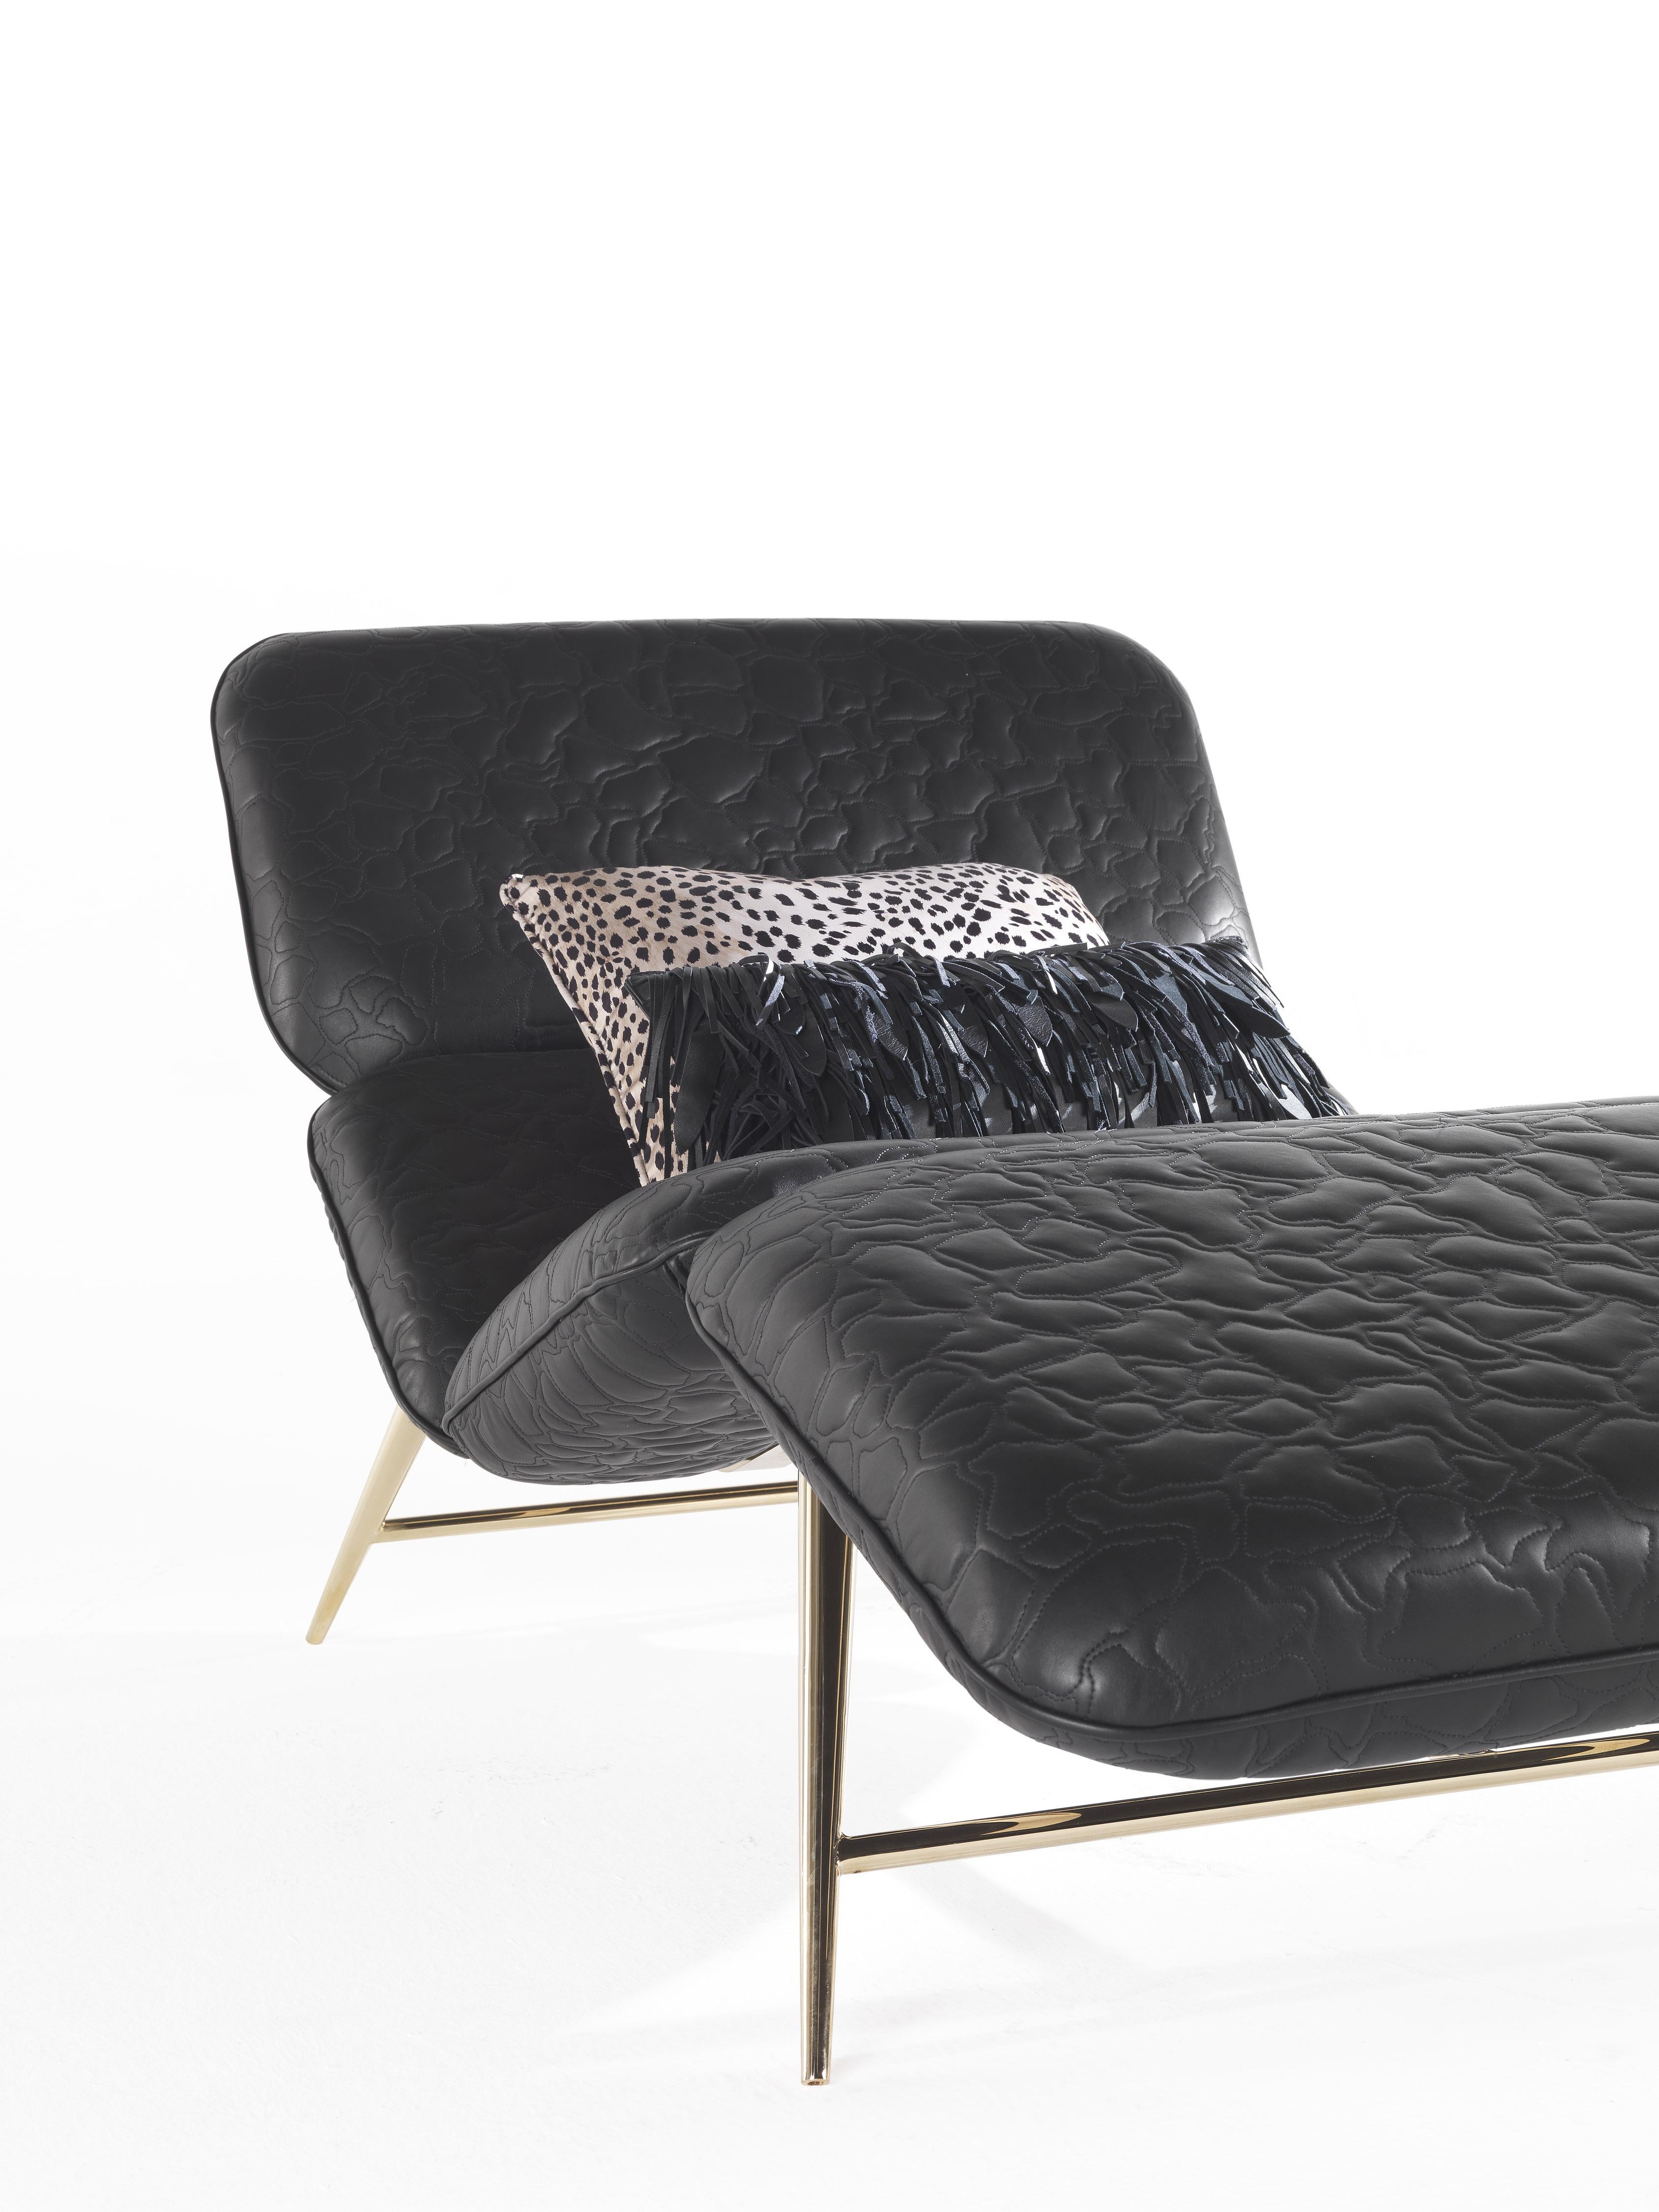 Modern 21st Century Tahiti Chaise Lounge in Leather by Roberto Cavalli Home Interiors For Sale